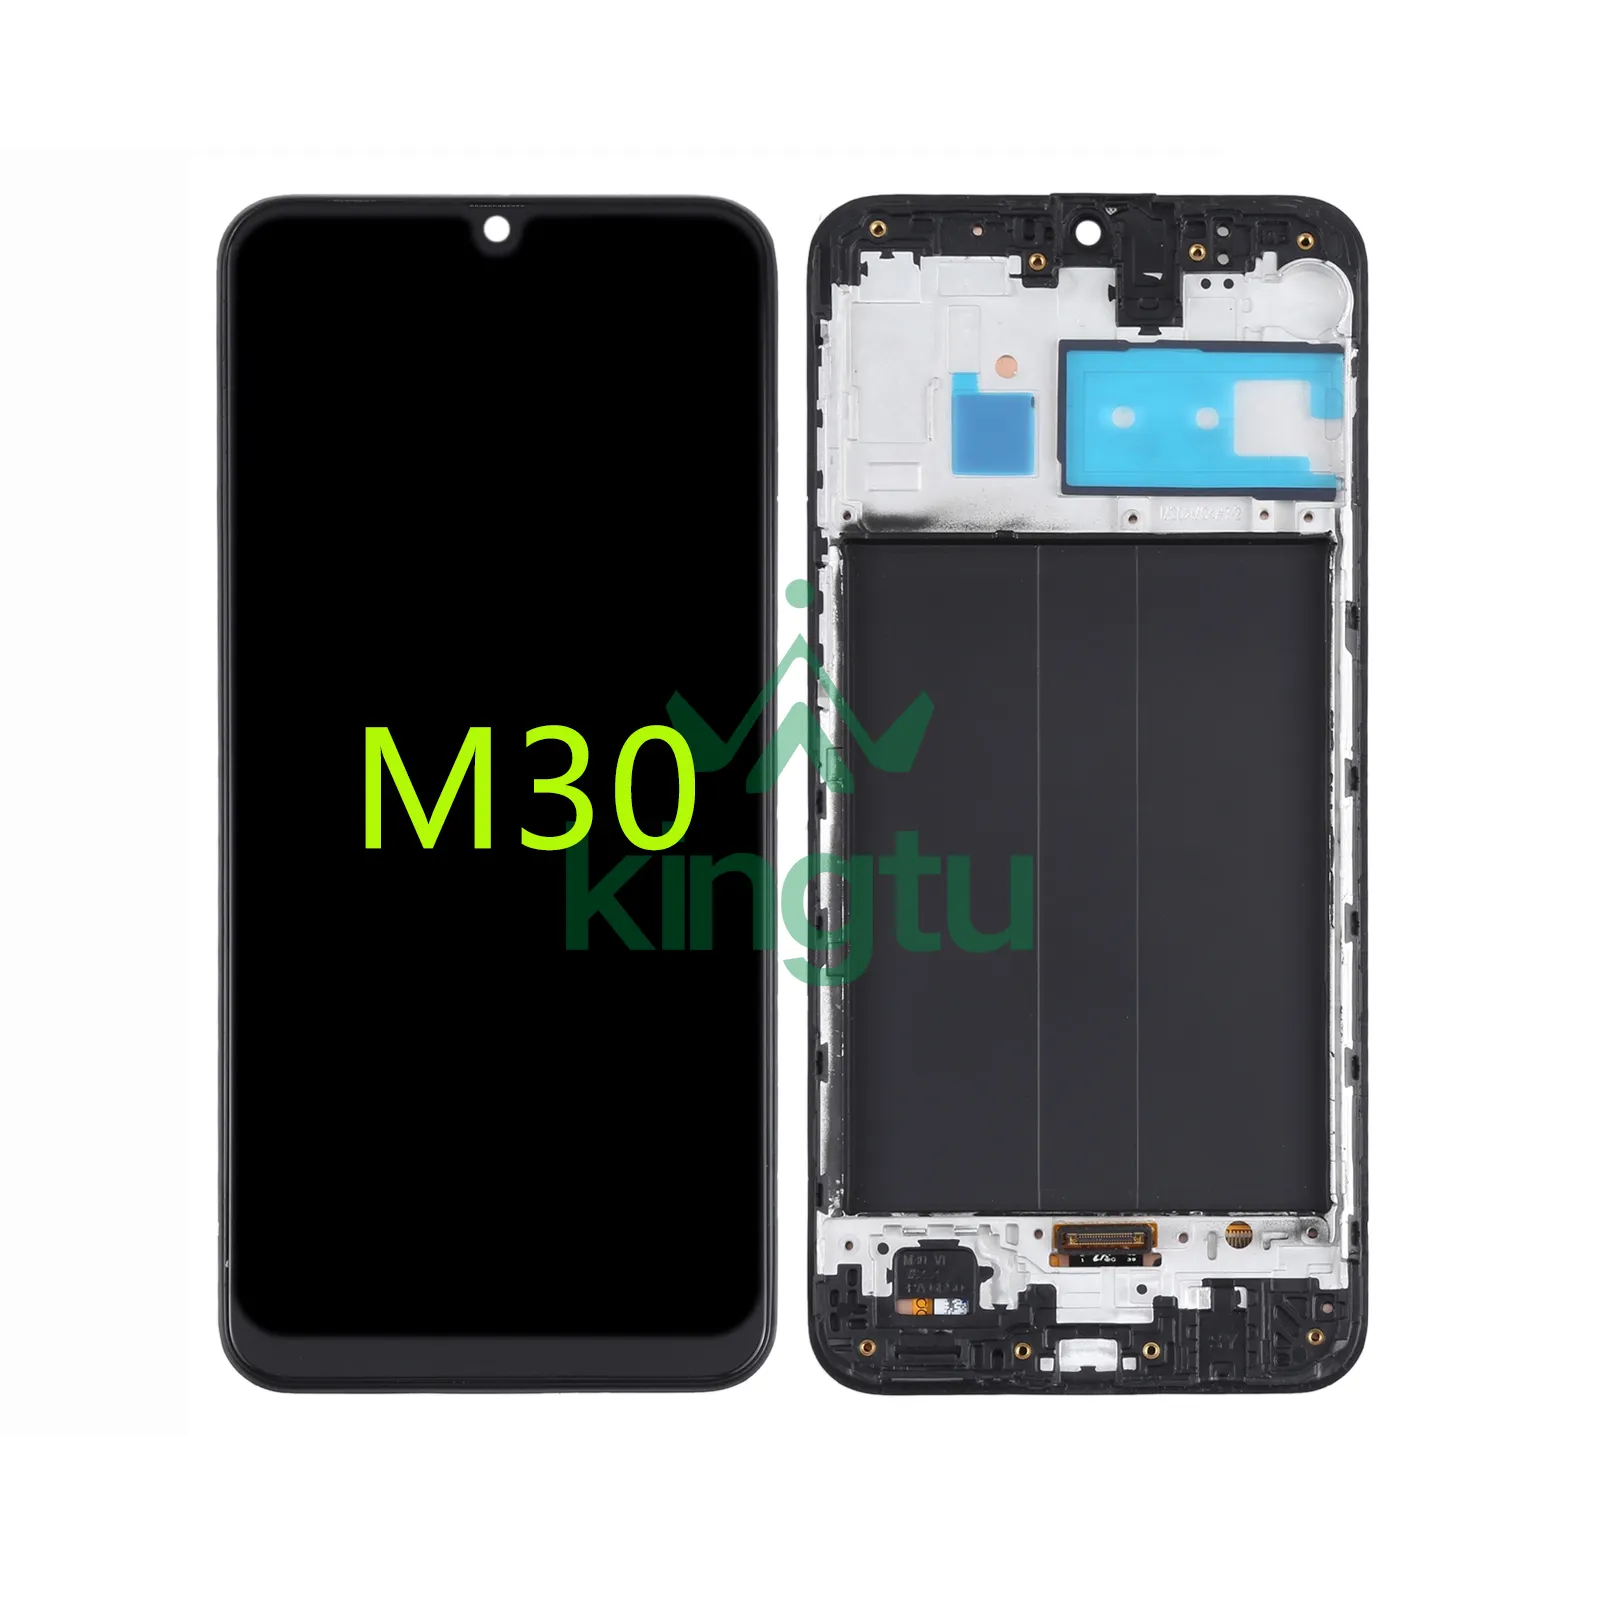 M30 LCD Screen Replacement for Samsung Galaxy M30 M305F M305F/DS M305 LCD Display Touch Screen Digitizer Assembly